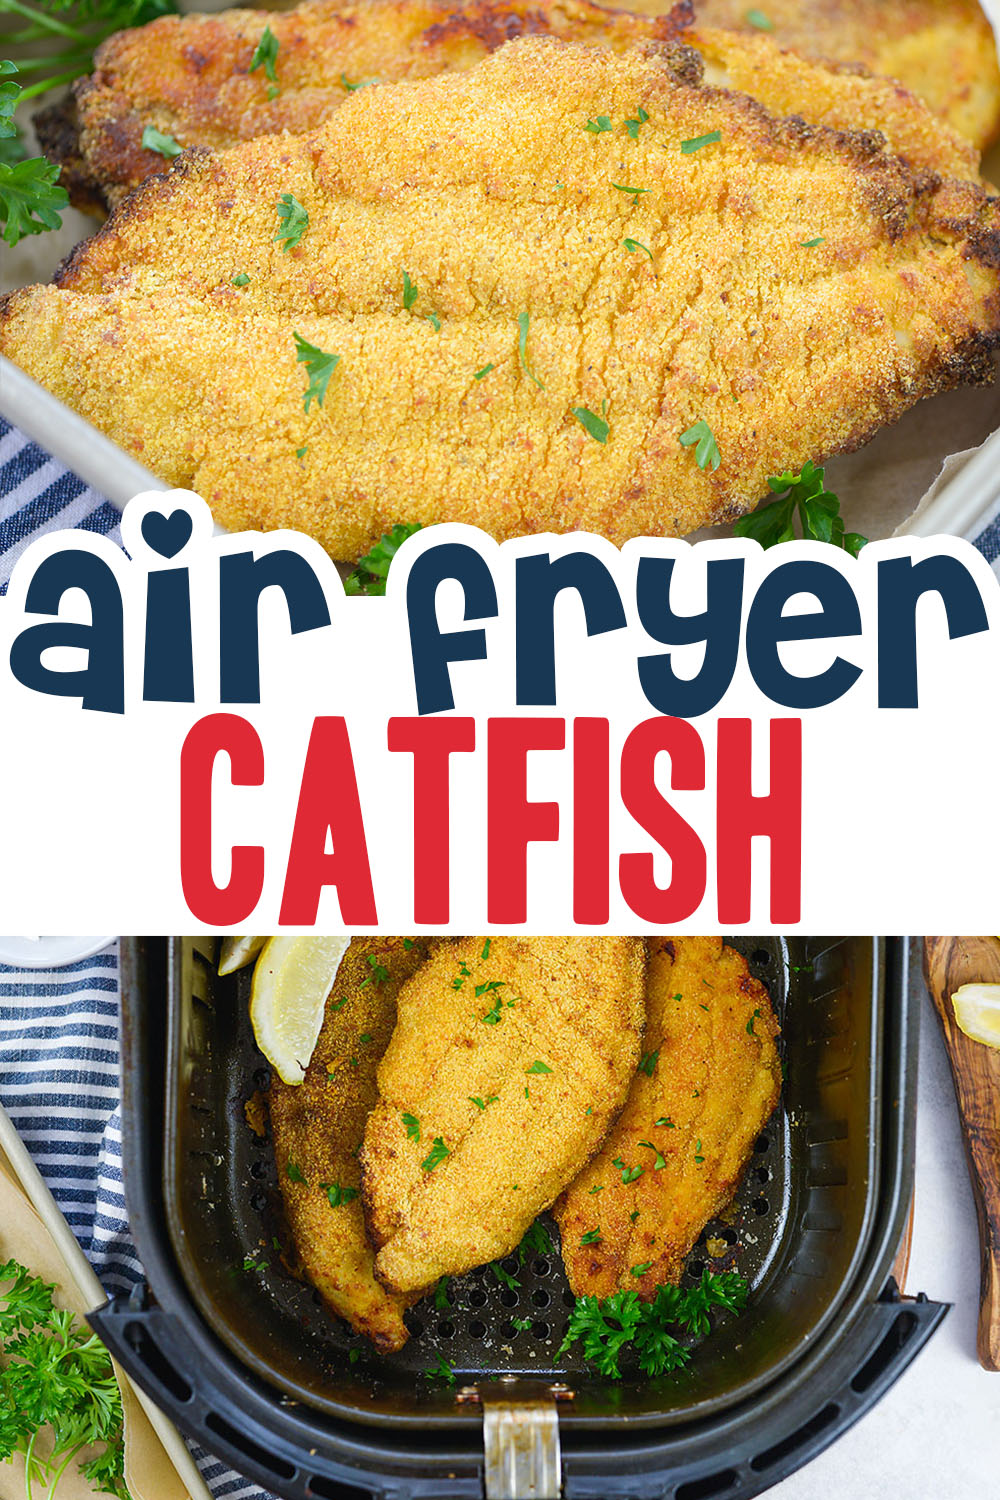 Crispy catfish fillets are easy to make in the air fryer!  This homemade seasoning has a light cajun flavor that pairs perfectly with the flaky white fish!